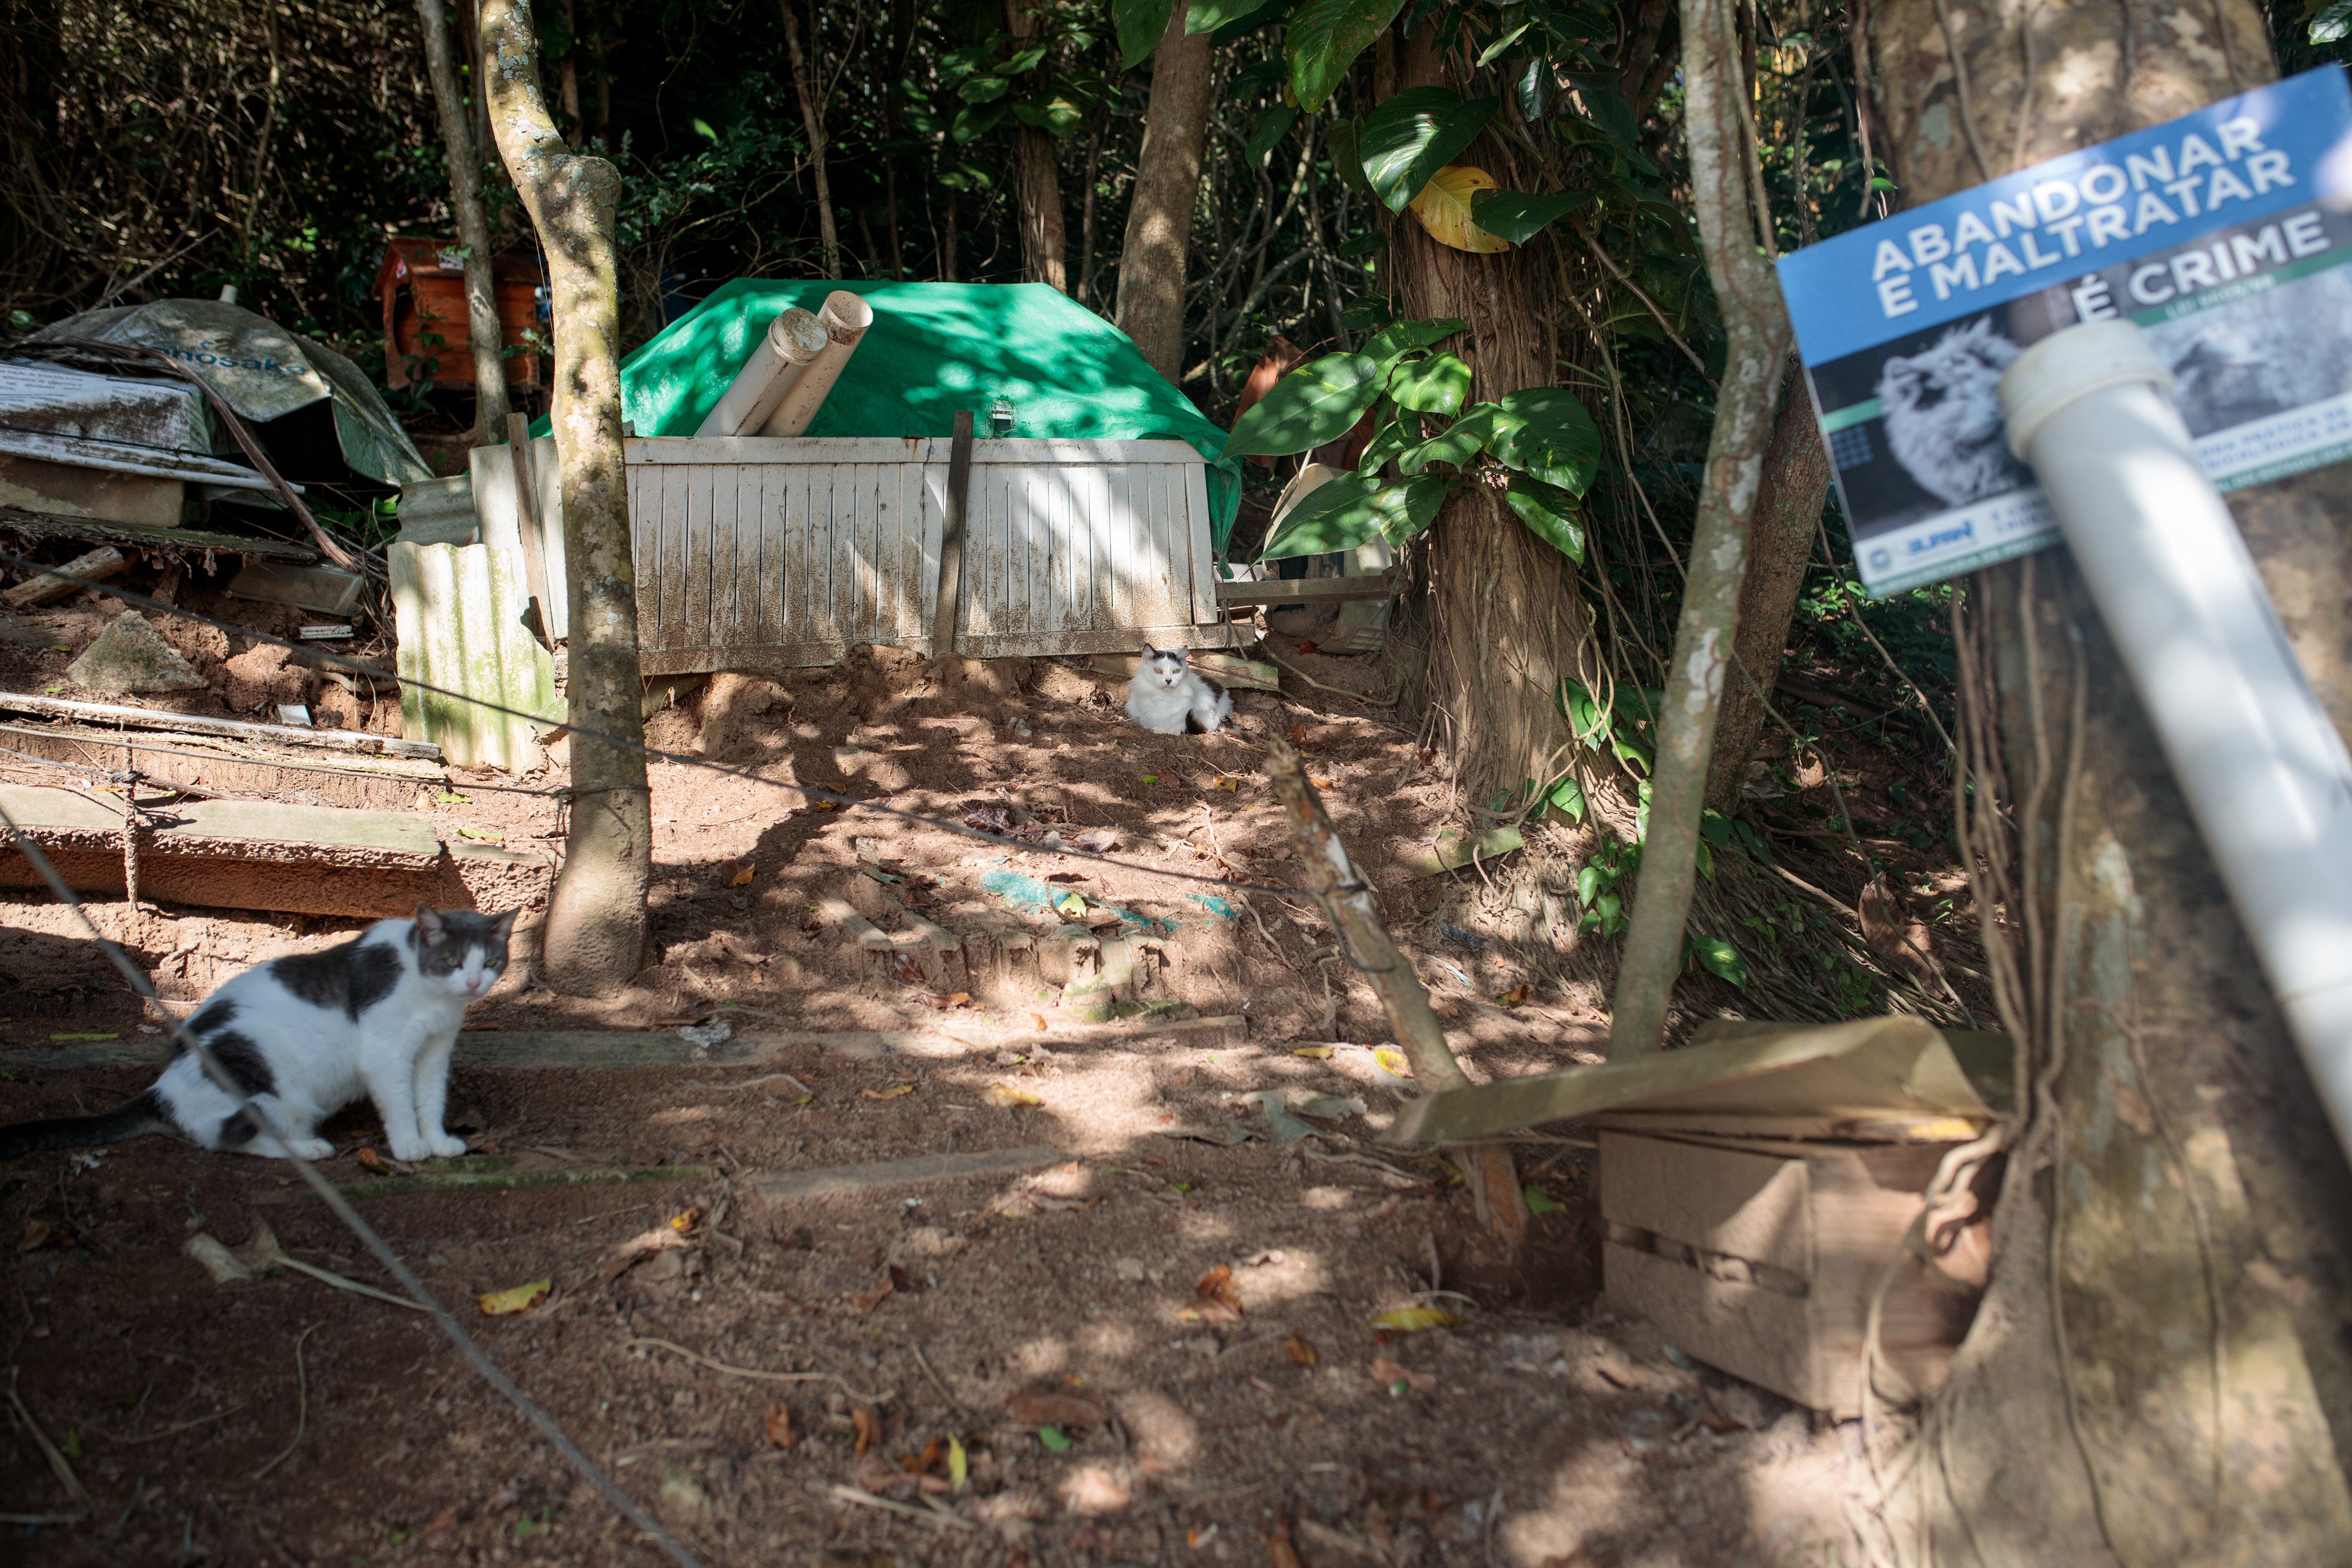 Let us stray: Brazil's Ilha Furtada, known as Ilha dos Gatos, where the number of abandoned felines has ballooned amid the pandemic